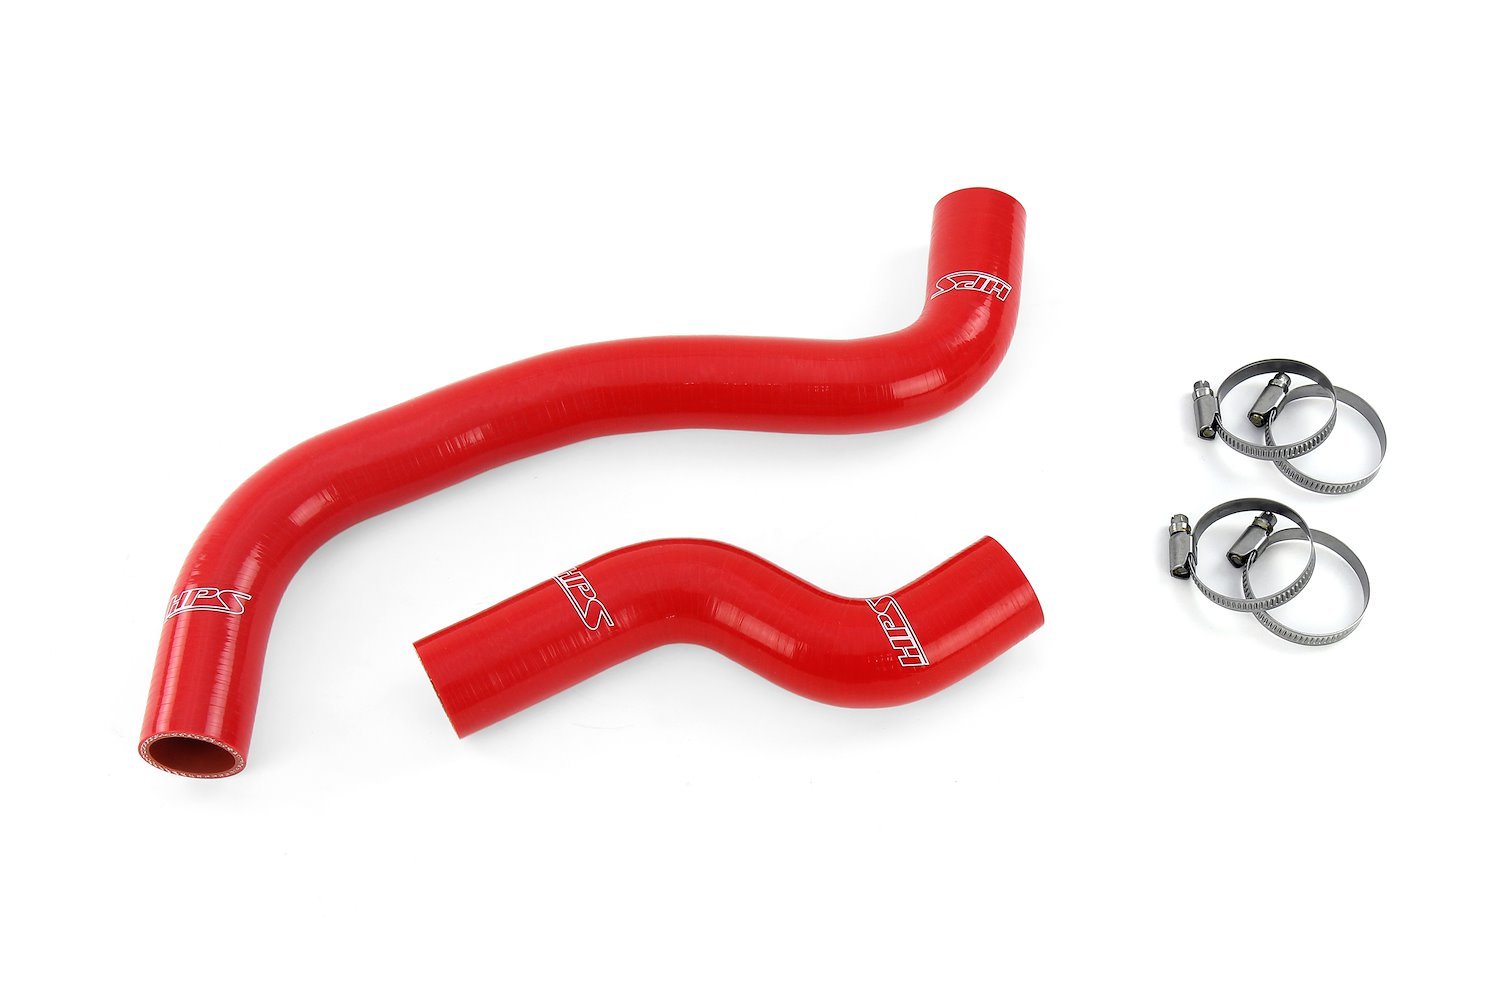 57-1081-RED Radiator Hose Kit, 3-Ply Reinforced Silicone, Replaces Rubber Radiator Coolant Hoses